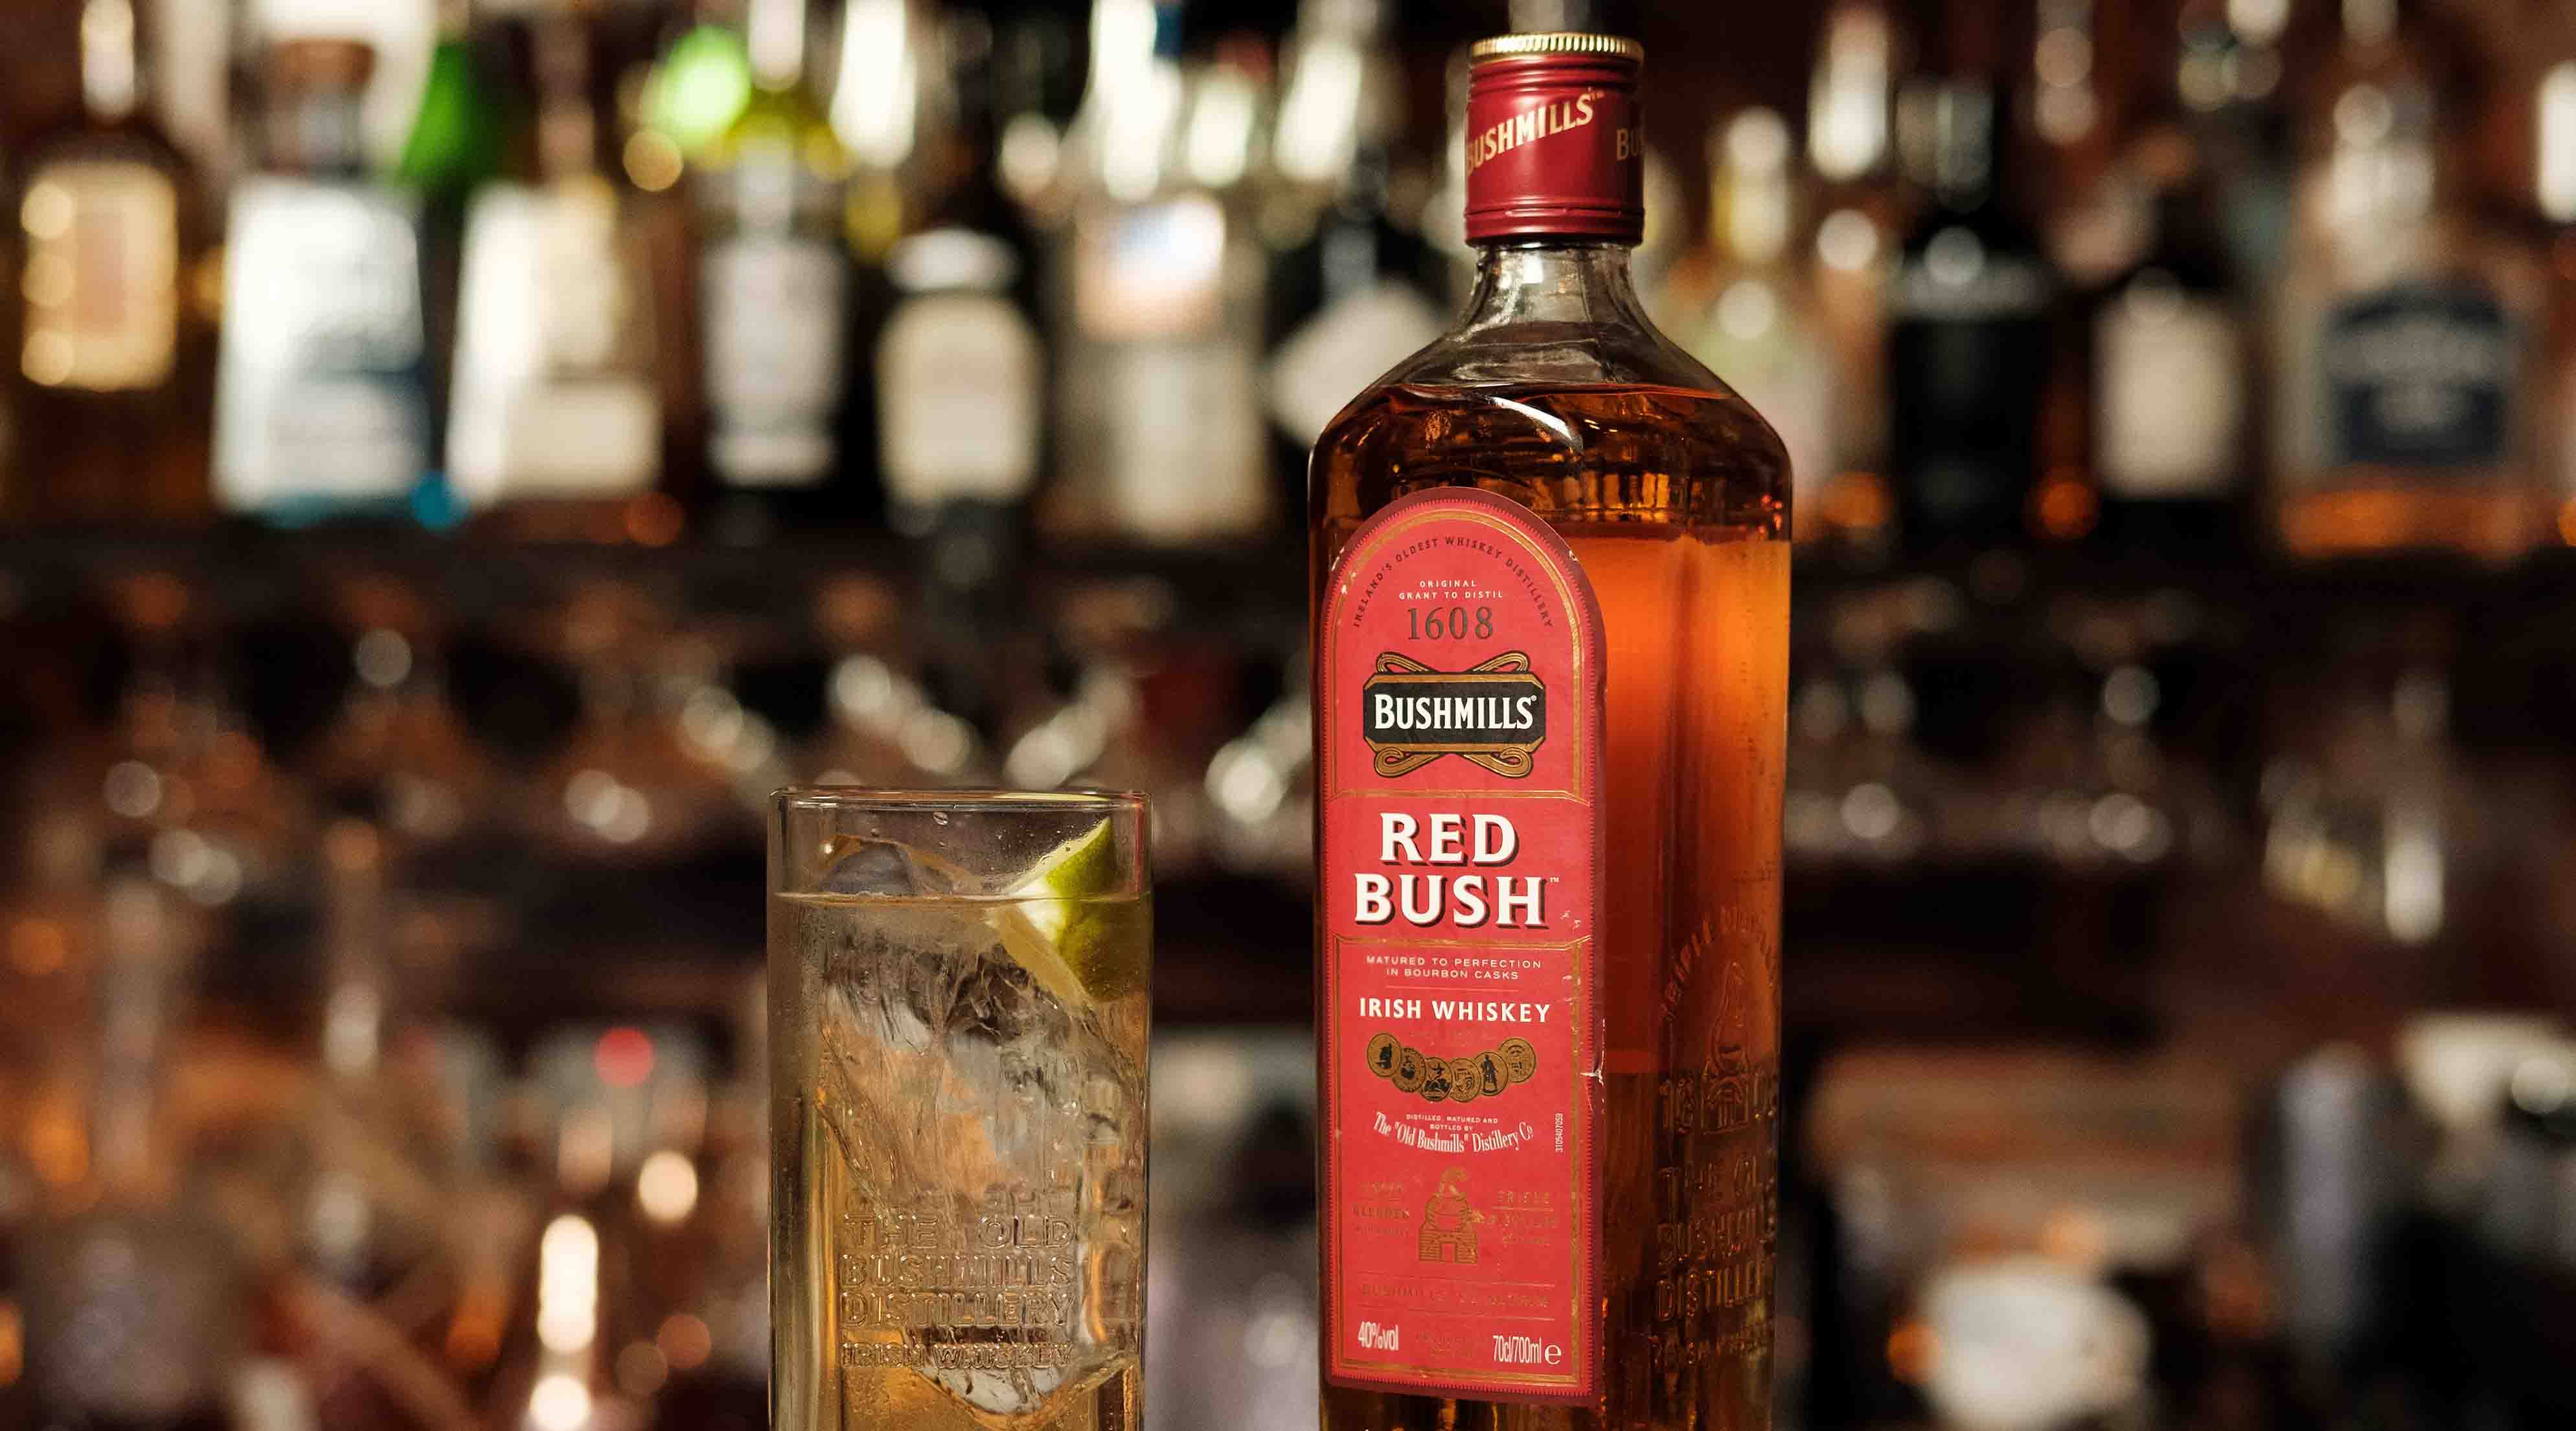 Bushmills Red - the first new expression from The Old Bushmills Distillery for the domestic market in nearly five years.